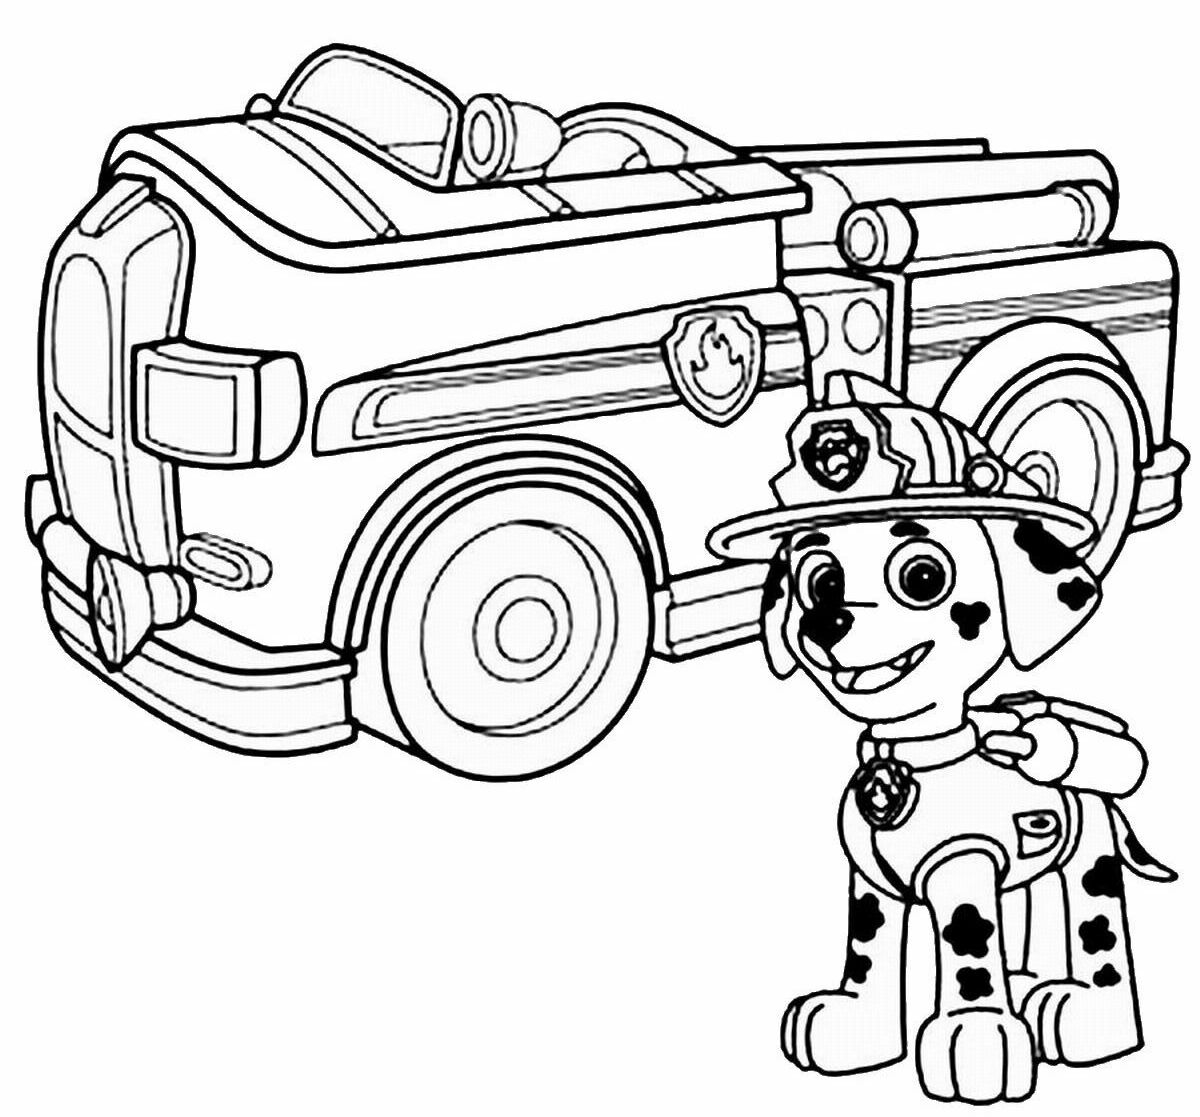 Printable Paw Patrol Coloring Pages - Coloring Home